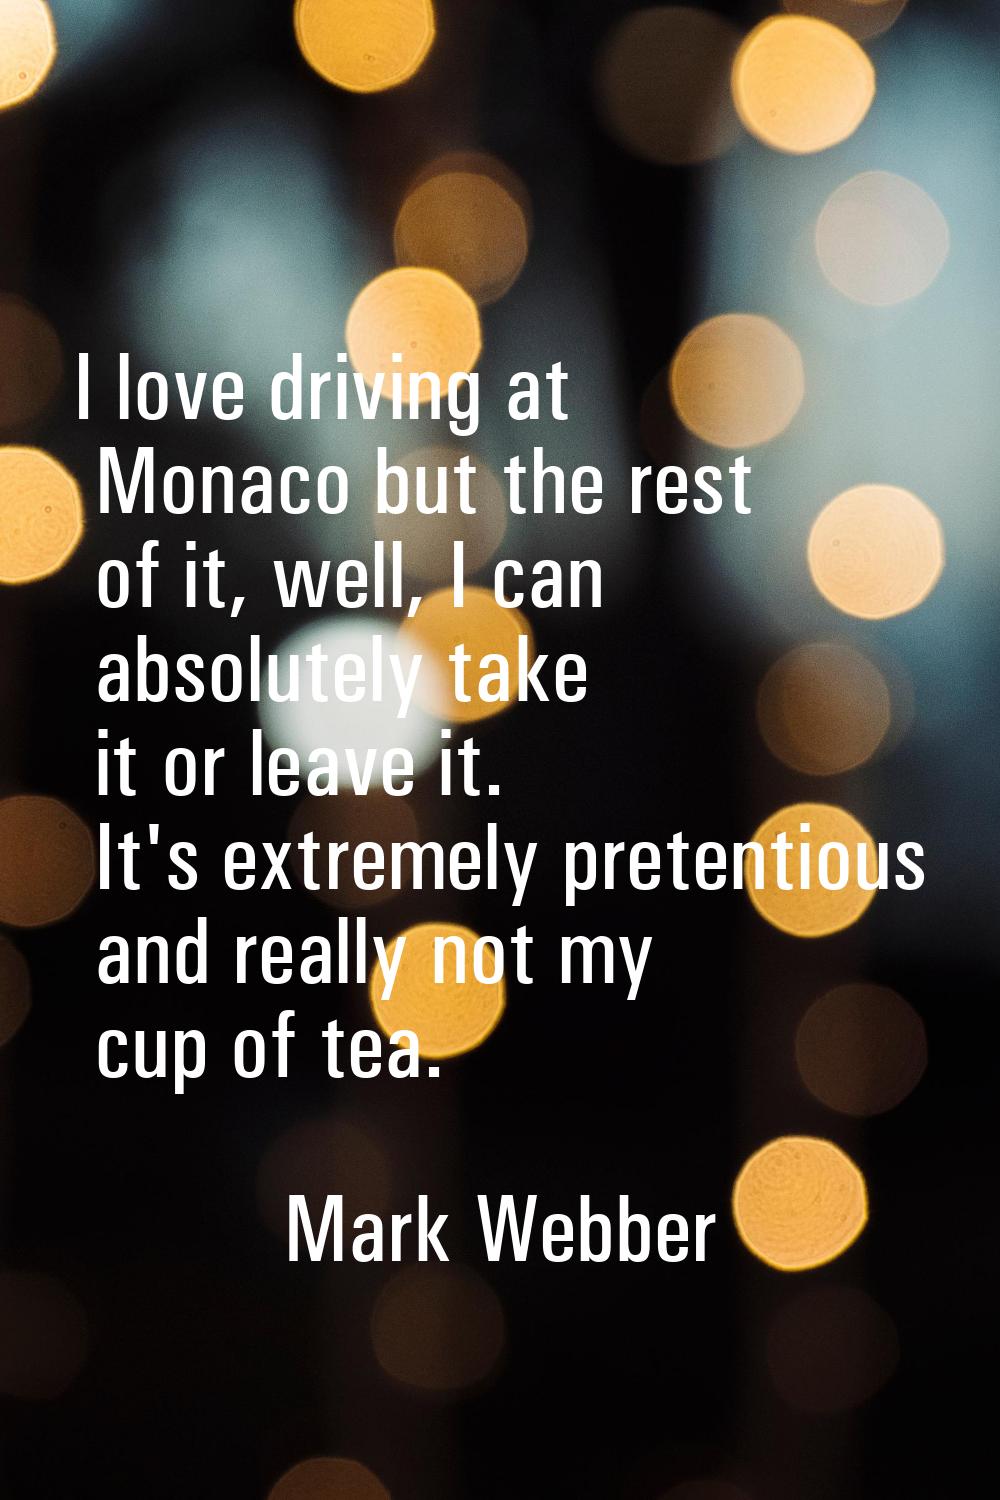 I love driving at Monaco but the rest of it, well, I can absolutely take it or leave it. It's extre